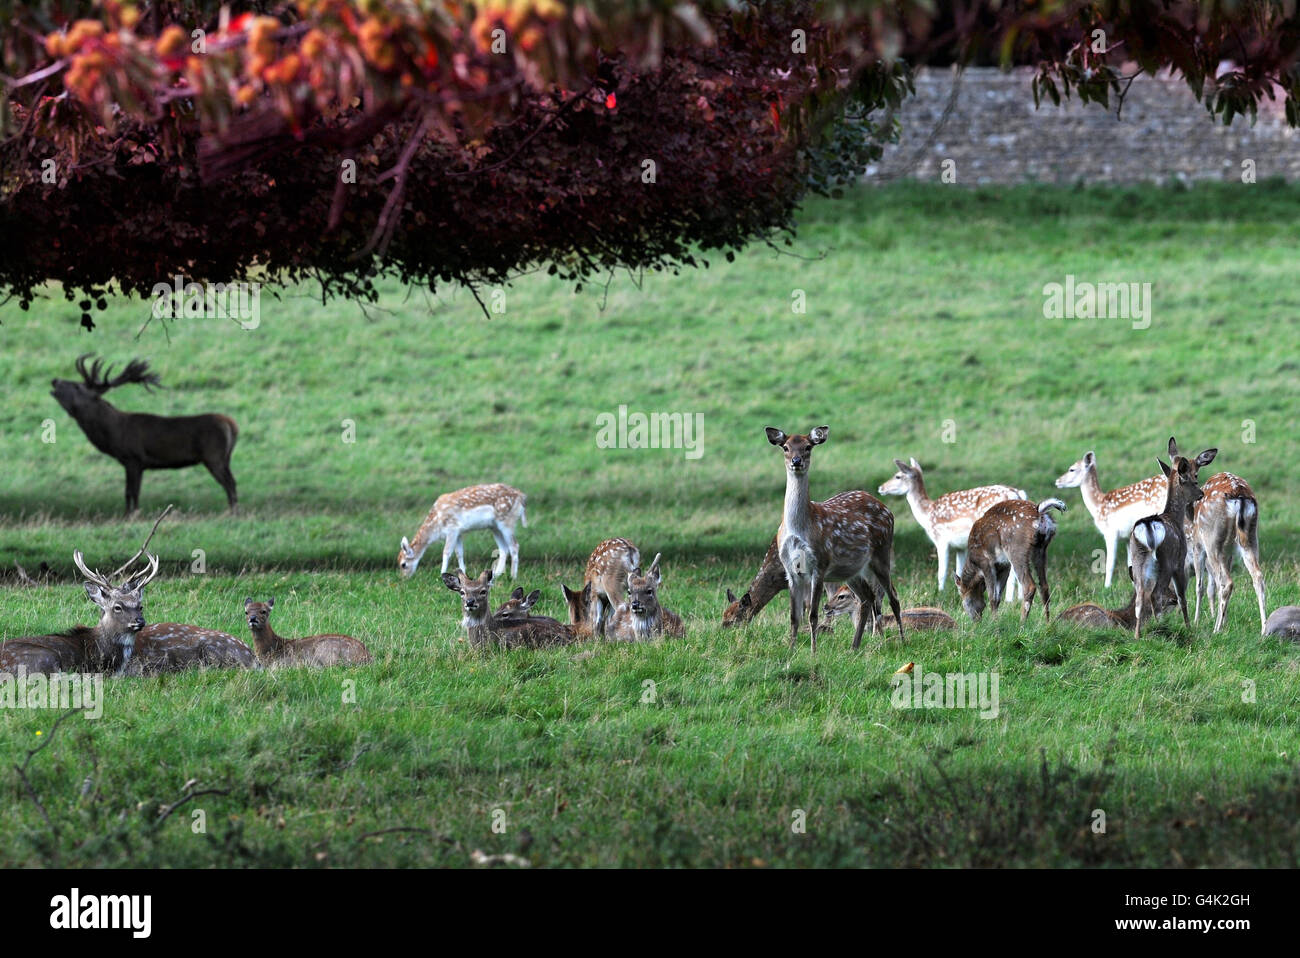 With the rutting season in deer parks across the UK just beginning, stags join the herds in staking out their territory in parkland at Studley Royal near Ripon, Yorkshire. Stock Photo